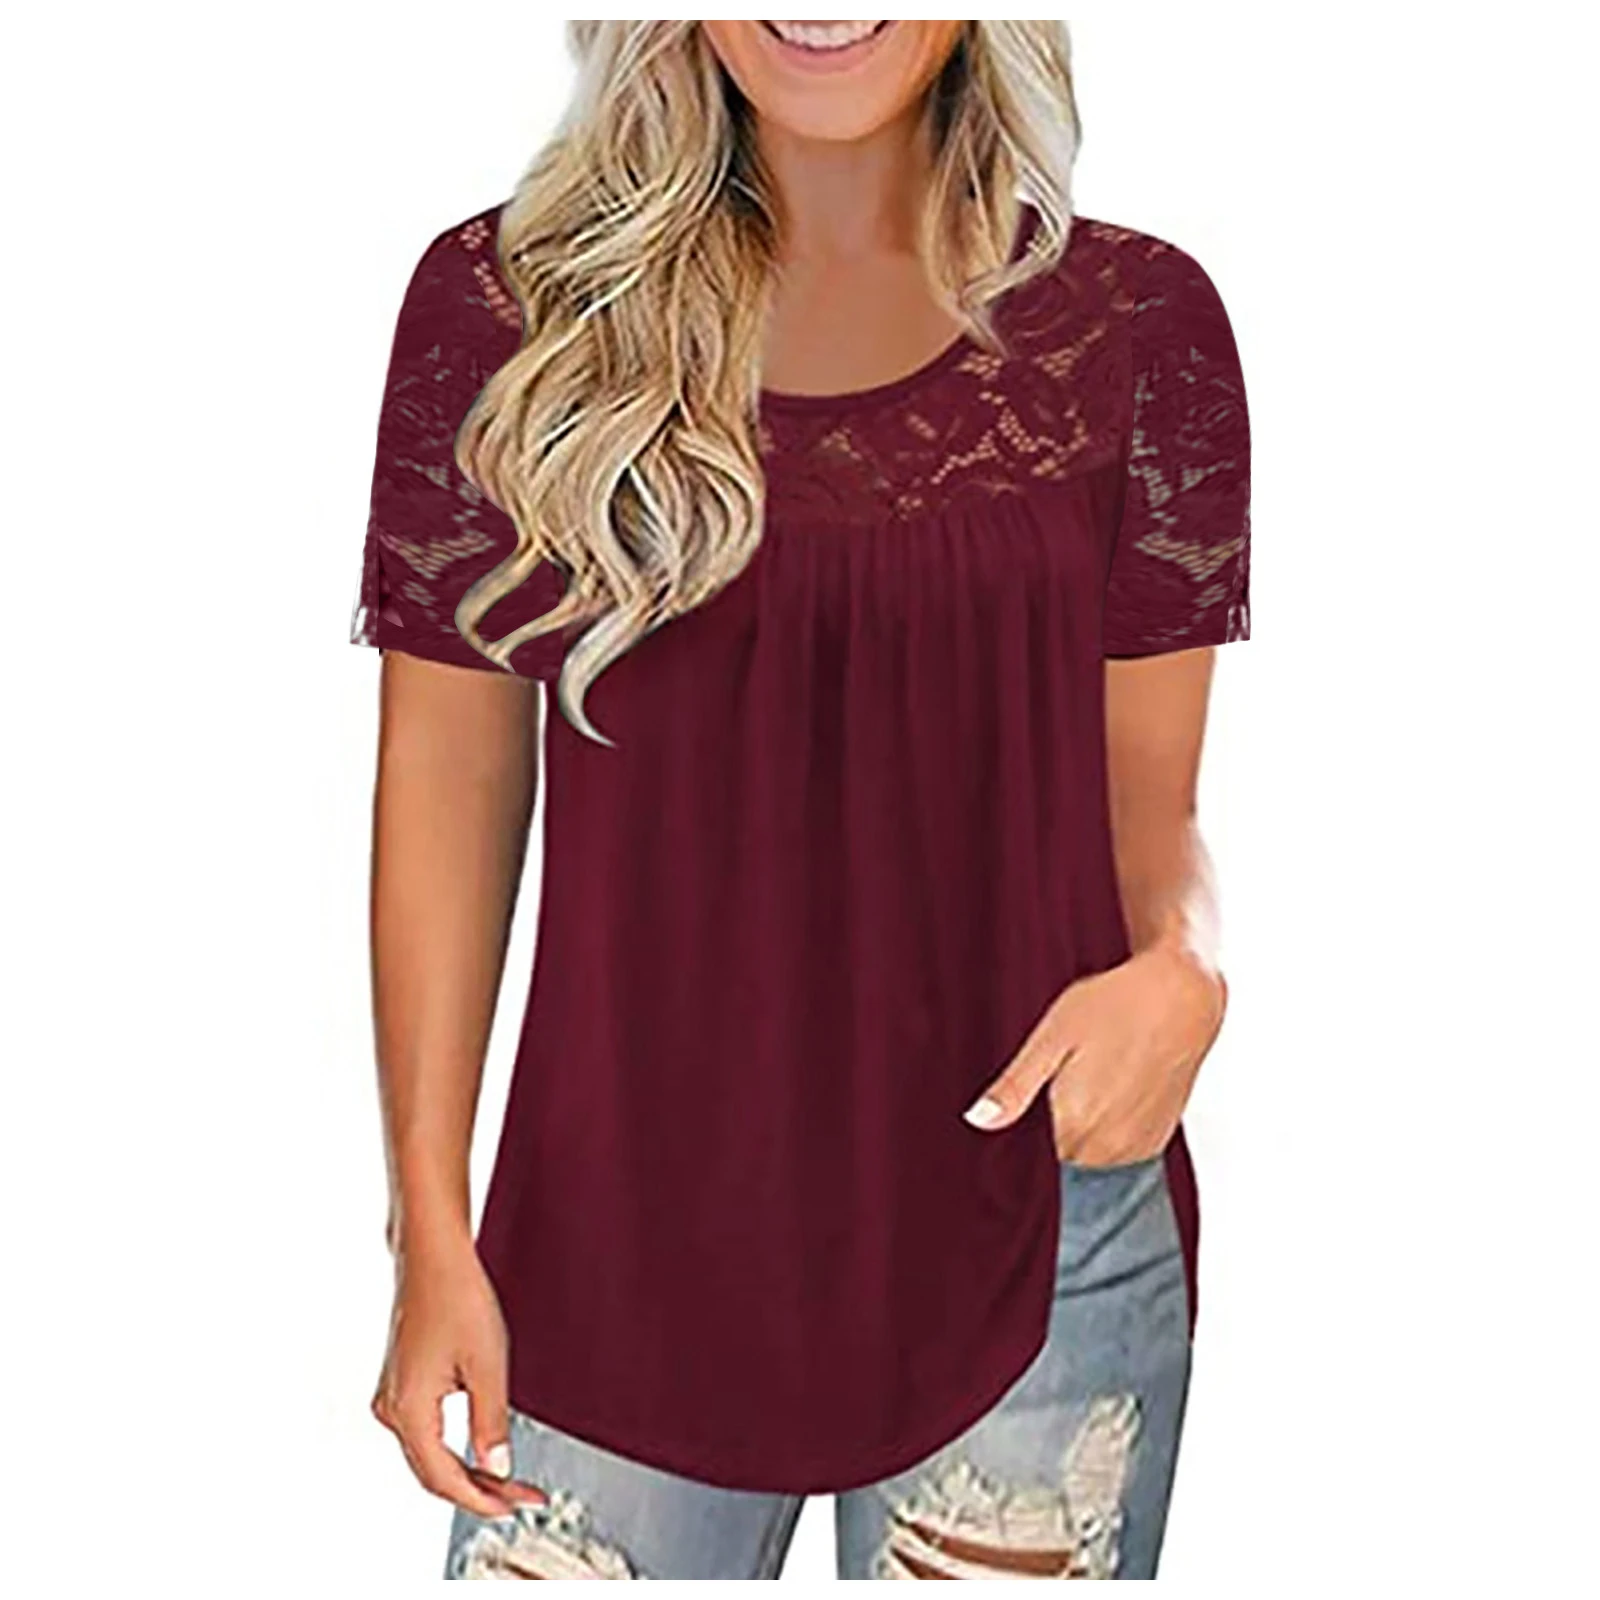 Hollow Out Tops for Women Womens V Neck T Shirts Short Sleeve Causal Summer Lace Tee Tops